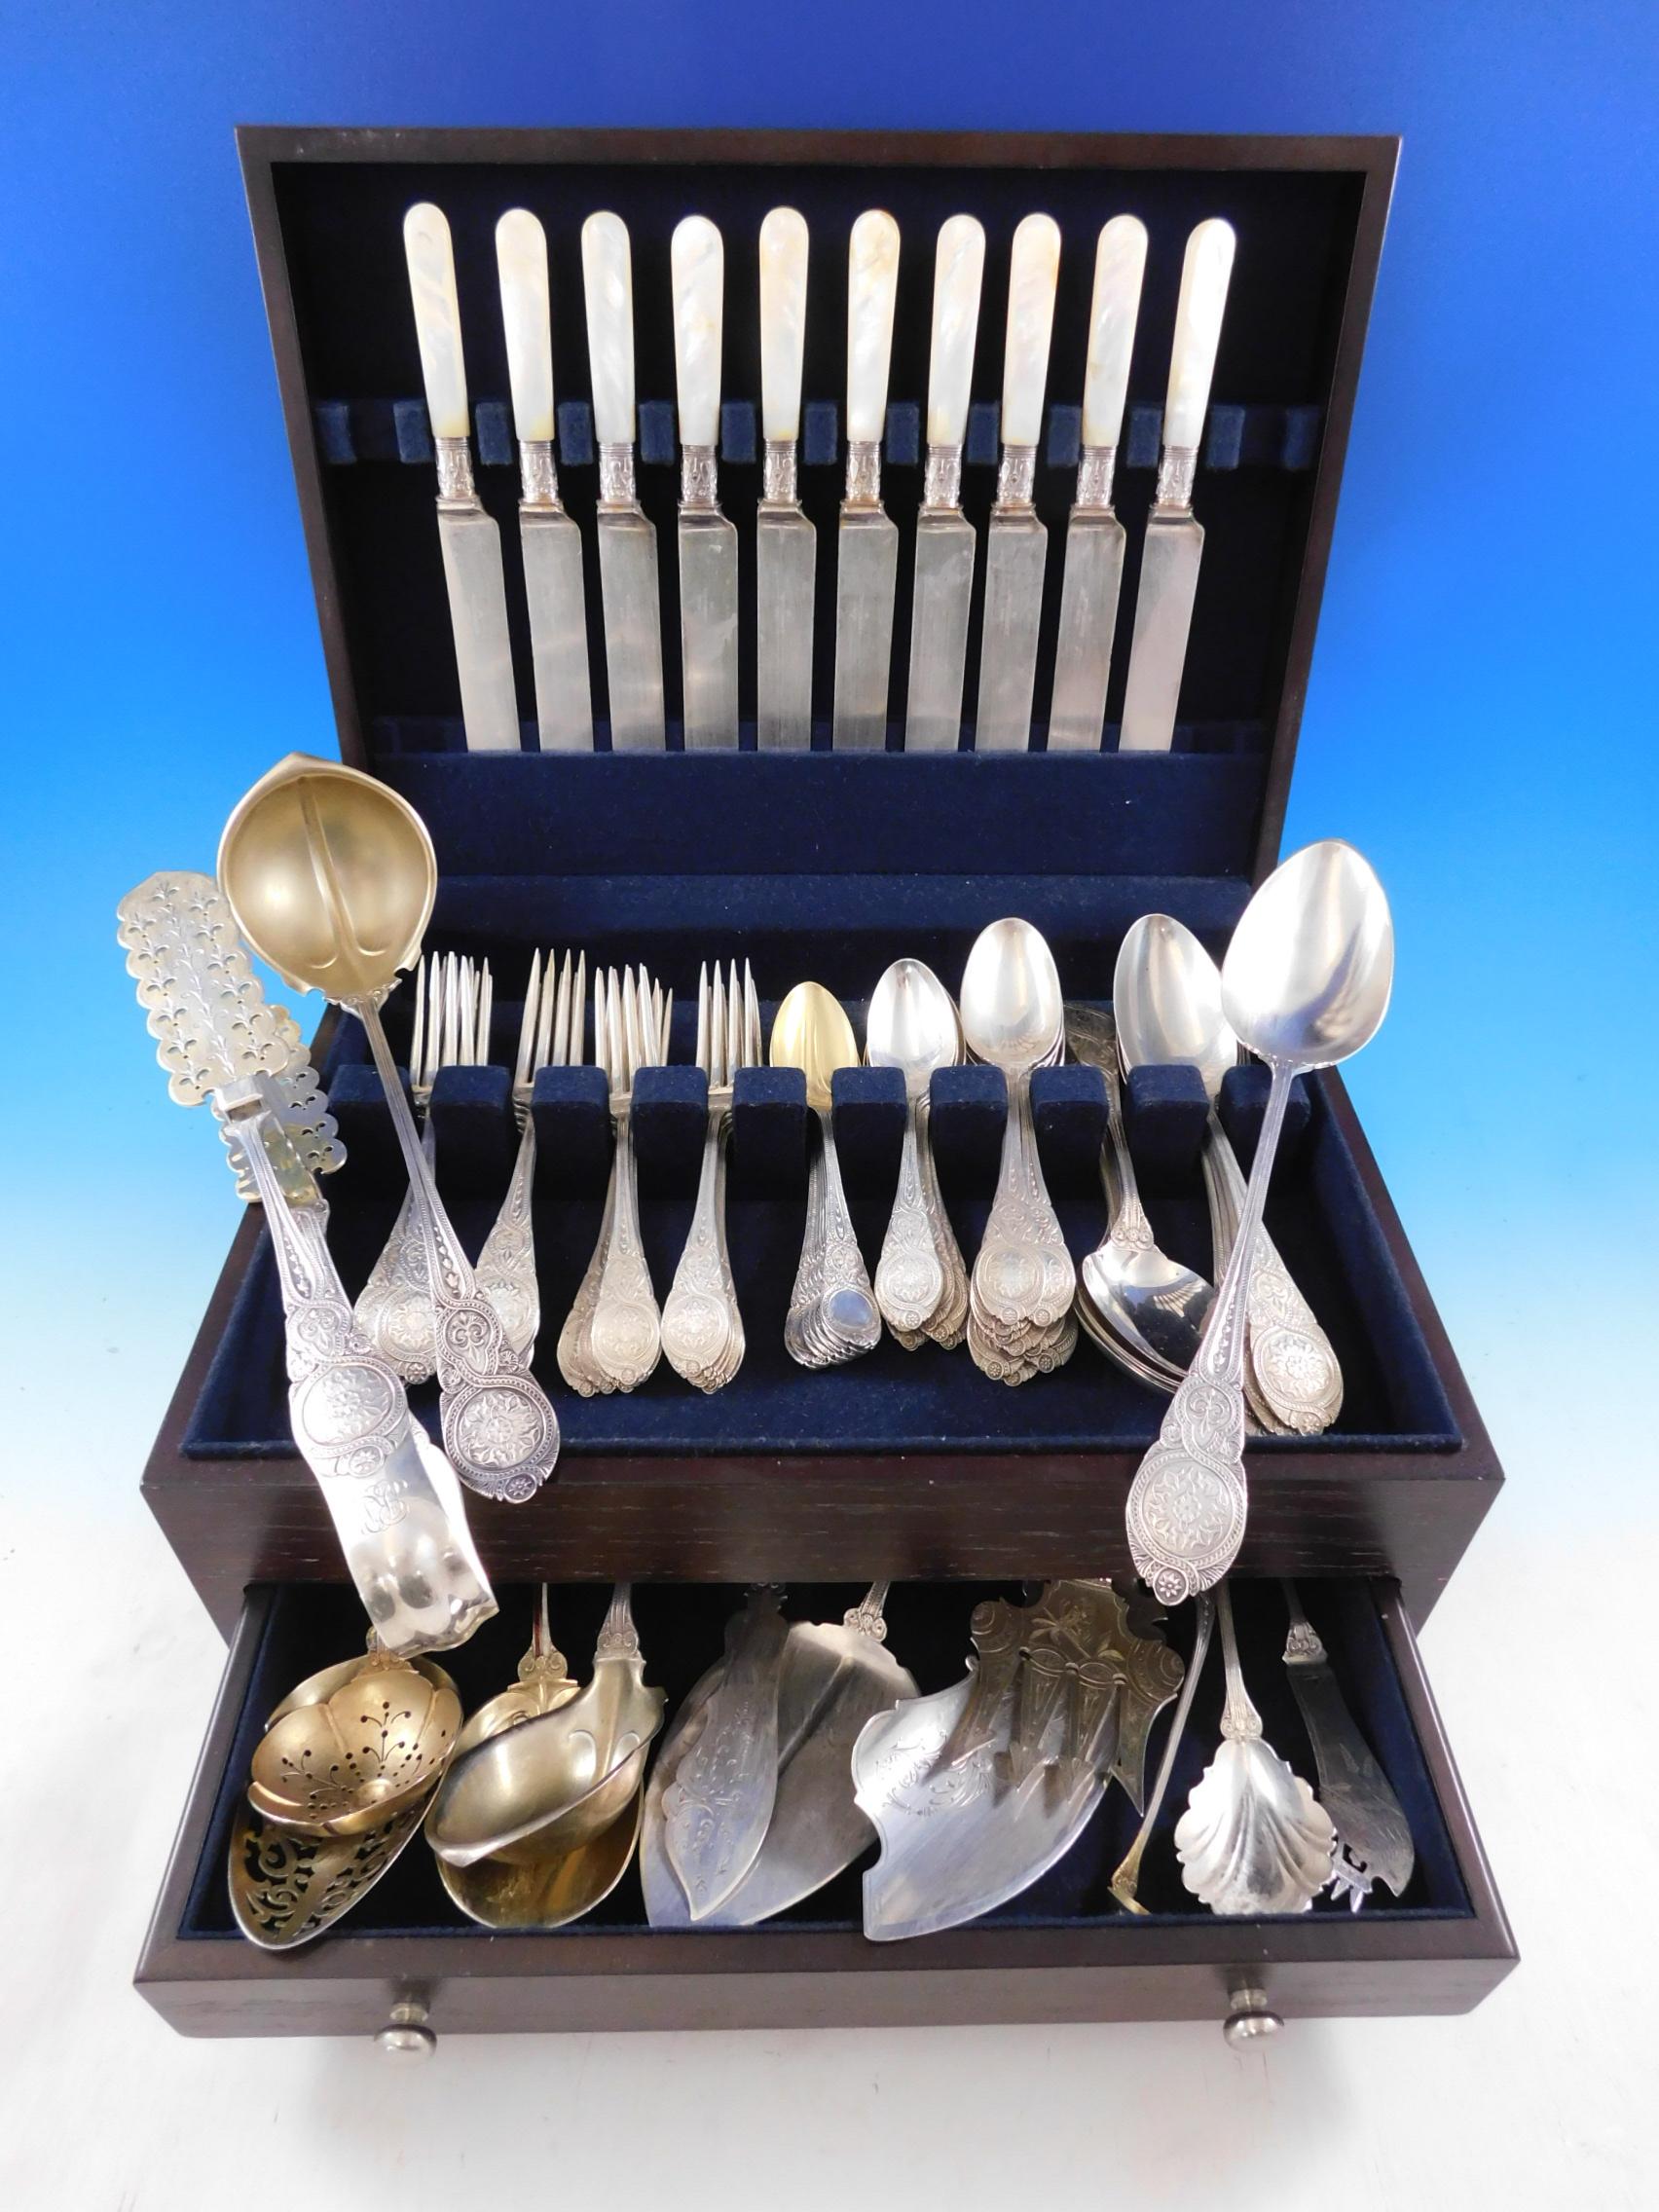 Incredible Moresque by Wendt sterling silver flatware set - 92 pieces, circa 1873. This set includes:

10 dinner knives, mother of pearl handles, 9